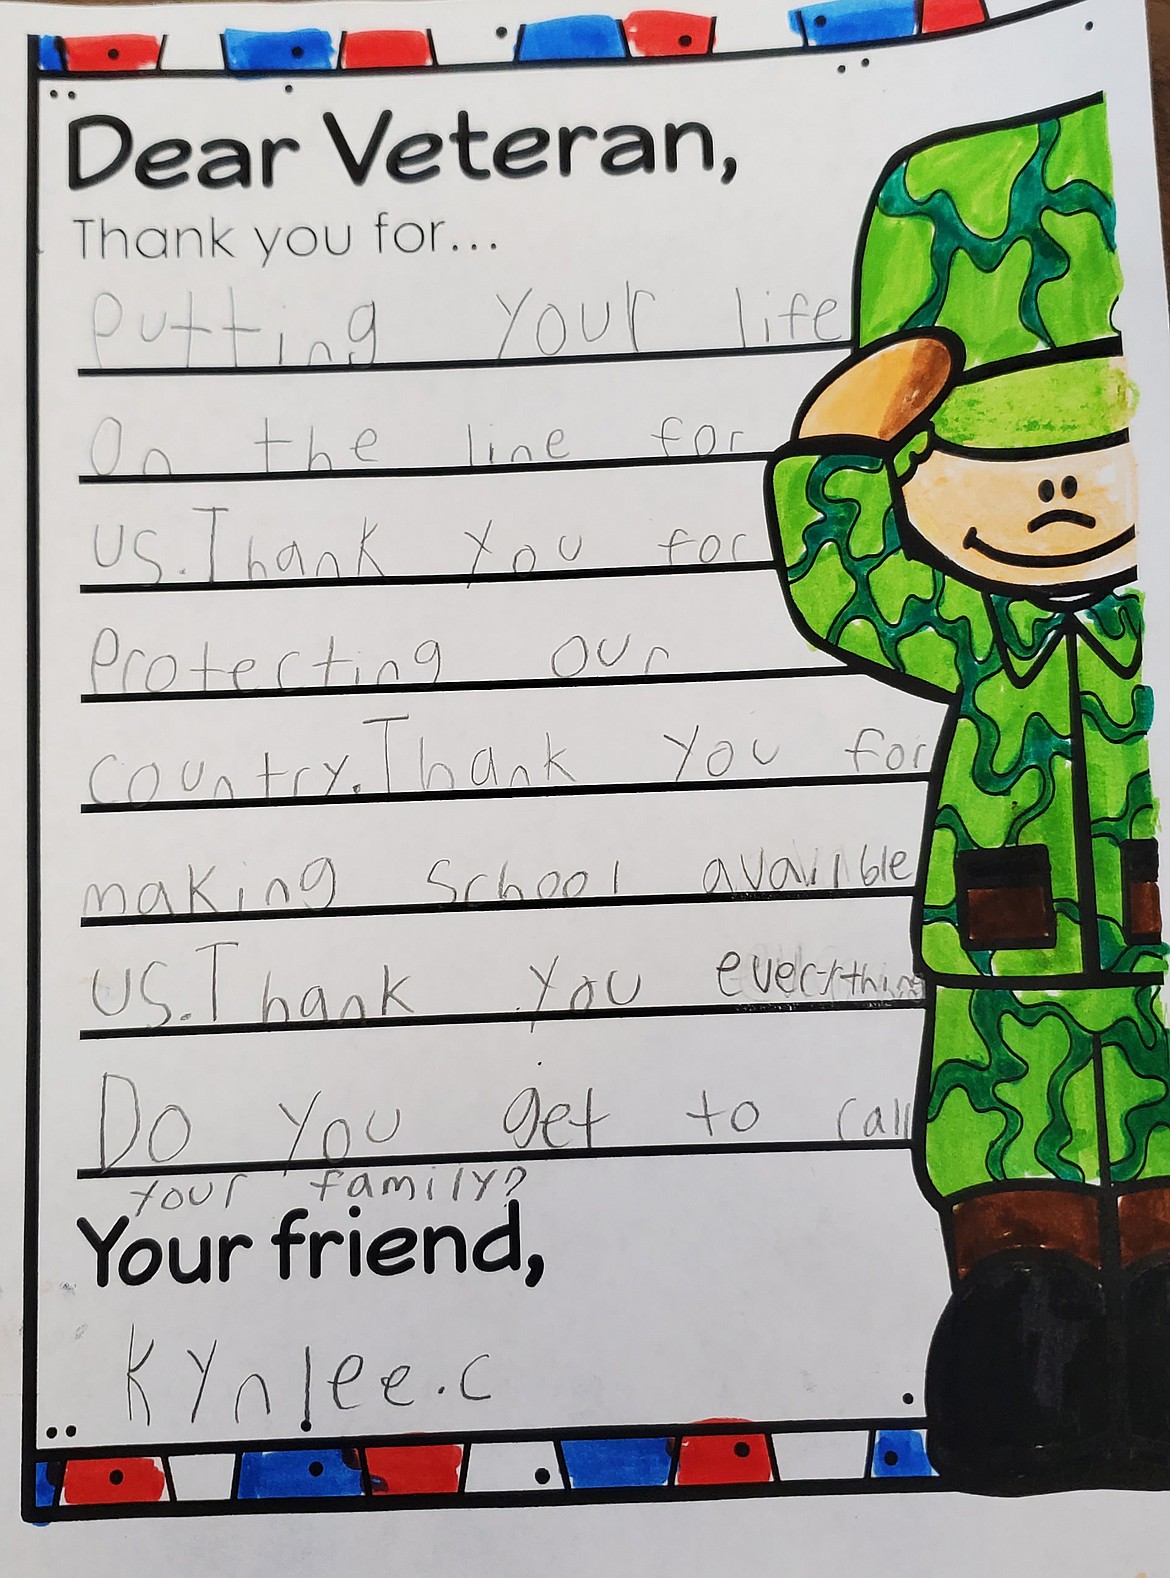 In honor of Veterans Day, Treaty Rock Elementary is sending letters and drawings to local vets and military deployed around the world. Second-grader Kynlee Chambers wrote in her letter to a veteran: "Thank you for putting your life on the line for us."